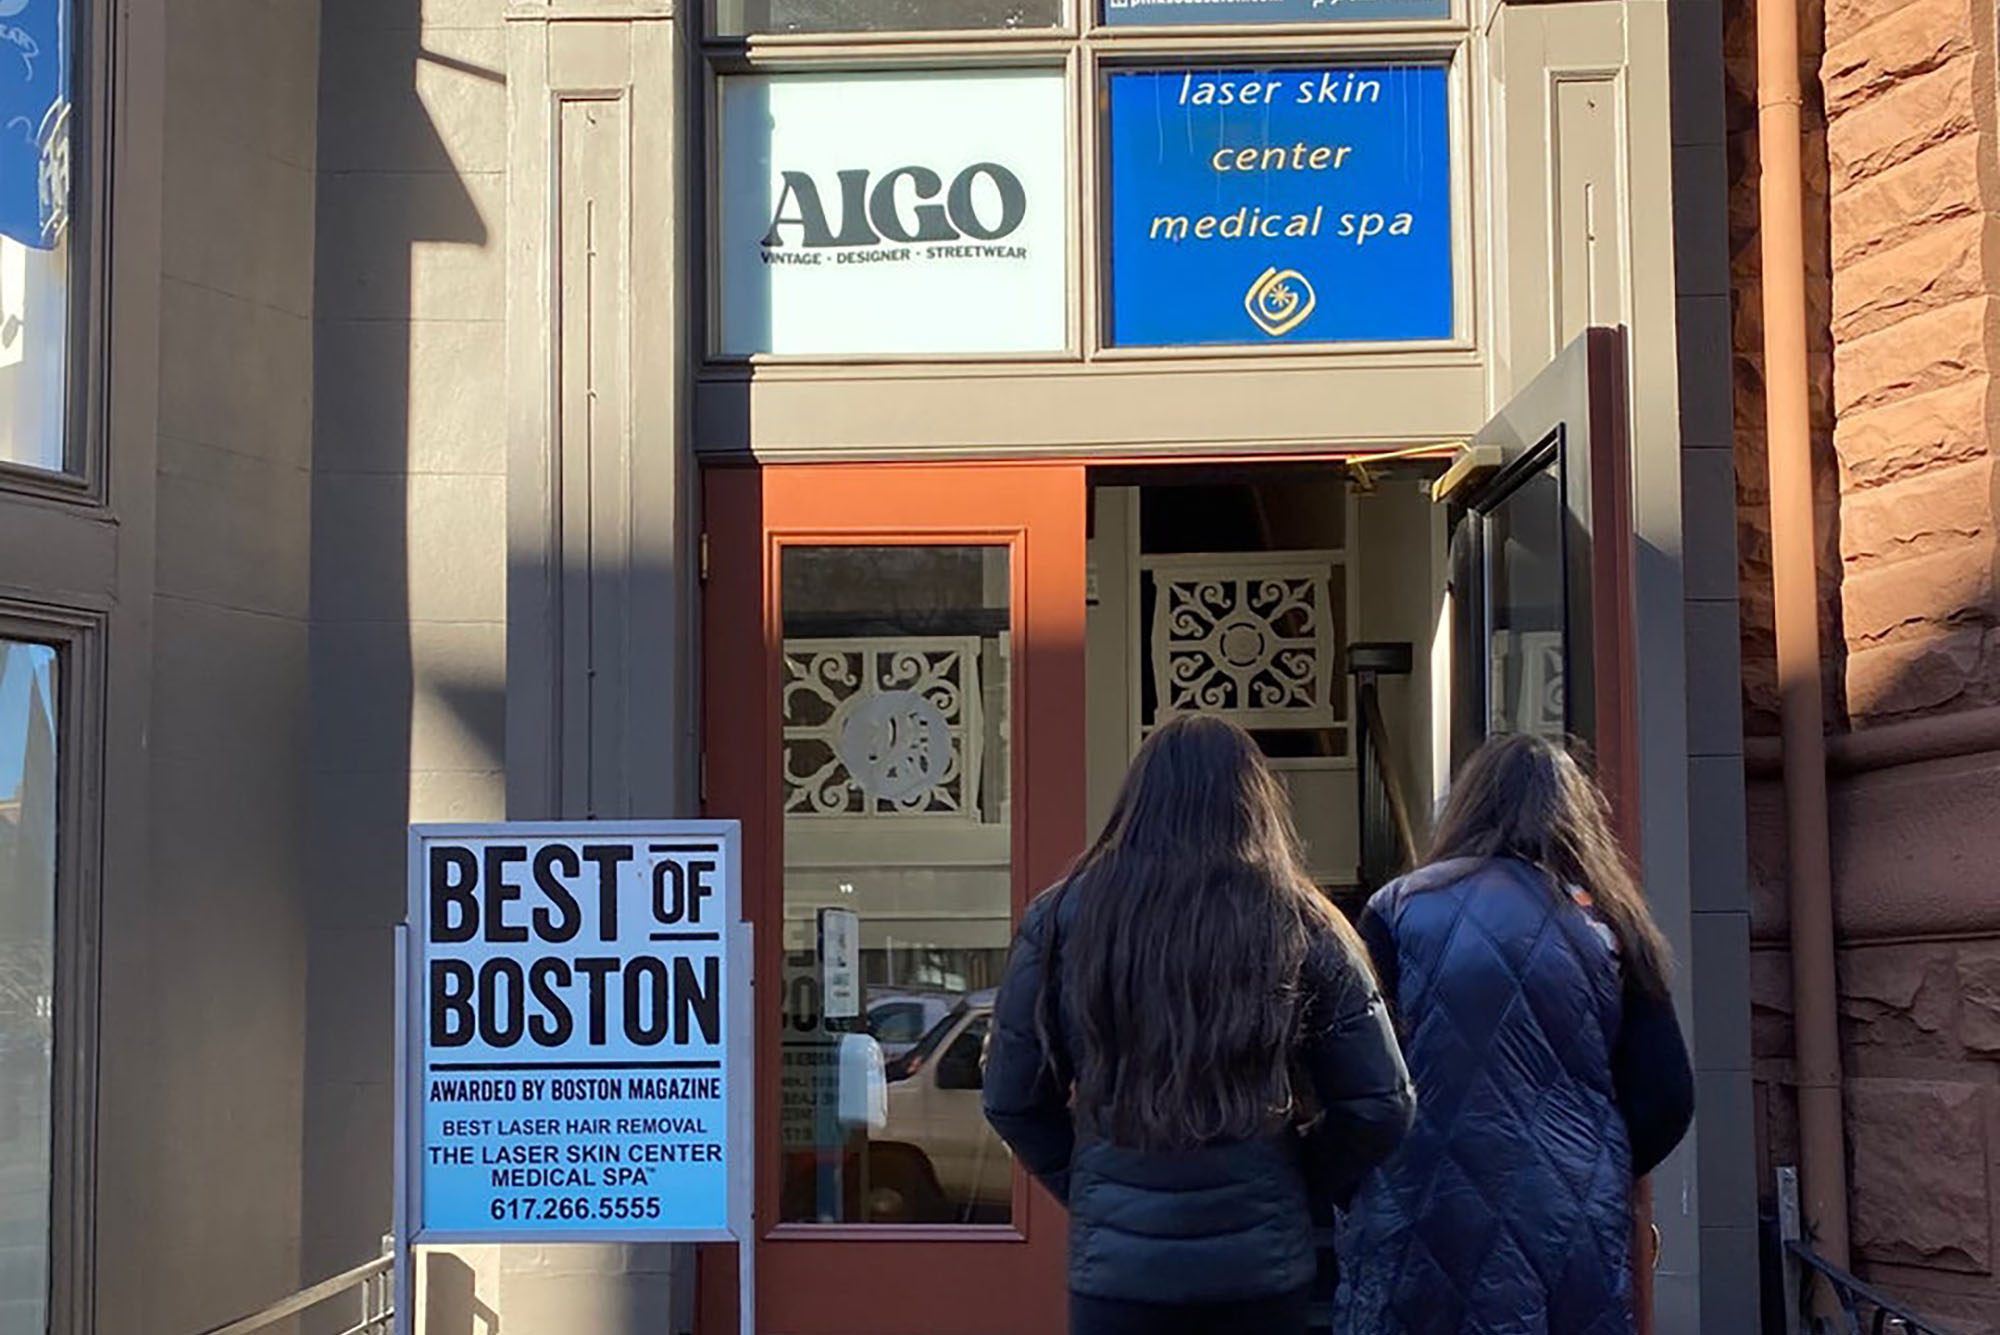 Photo: Two individuals in coats are entering a curbside store called Aigo.